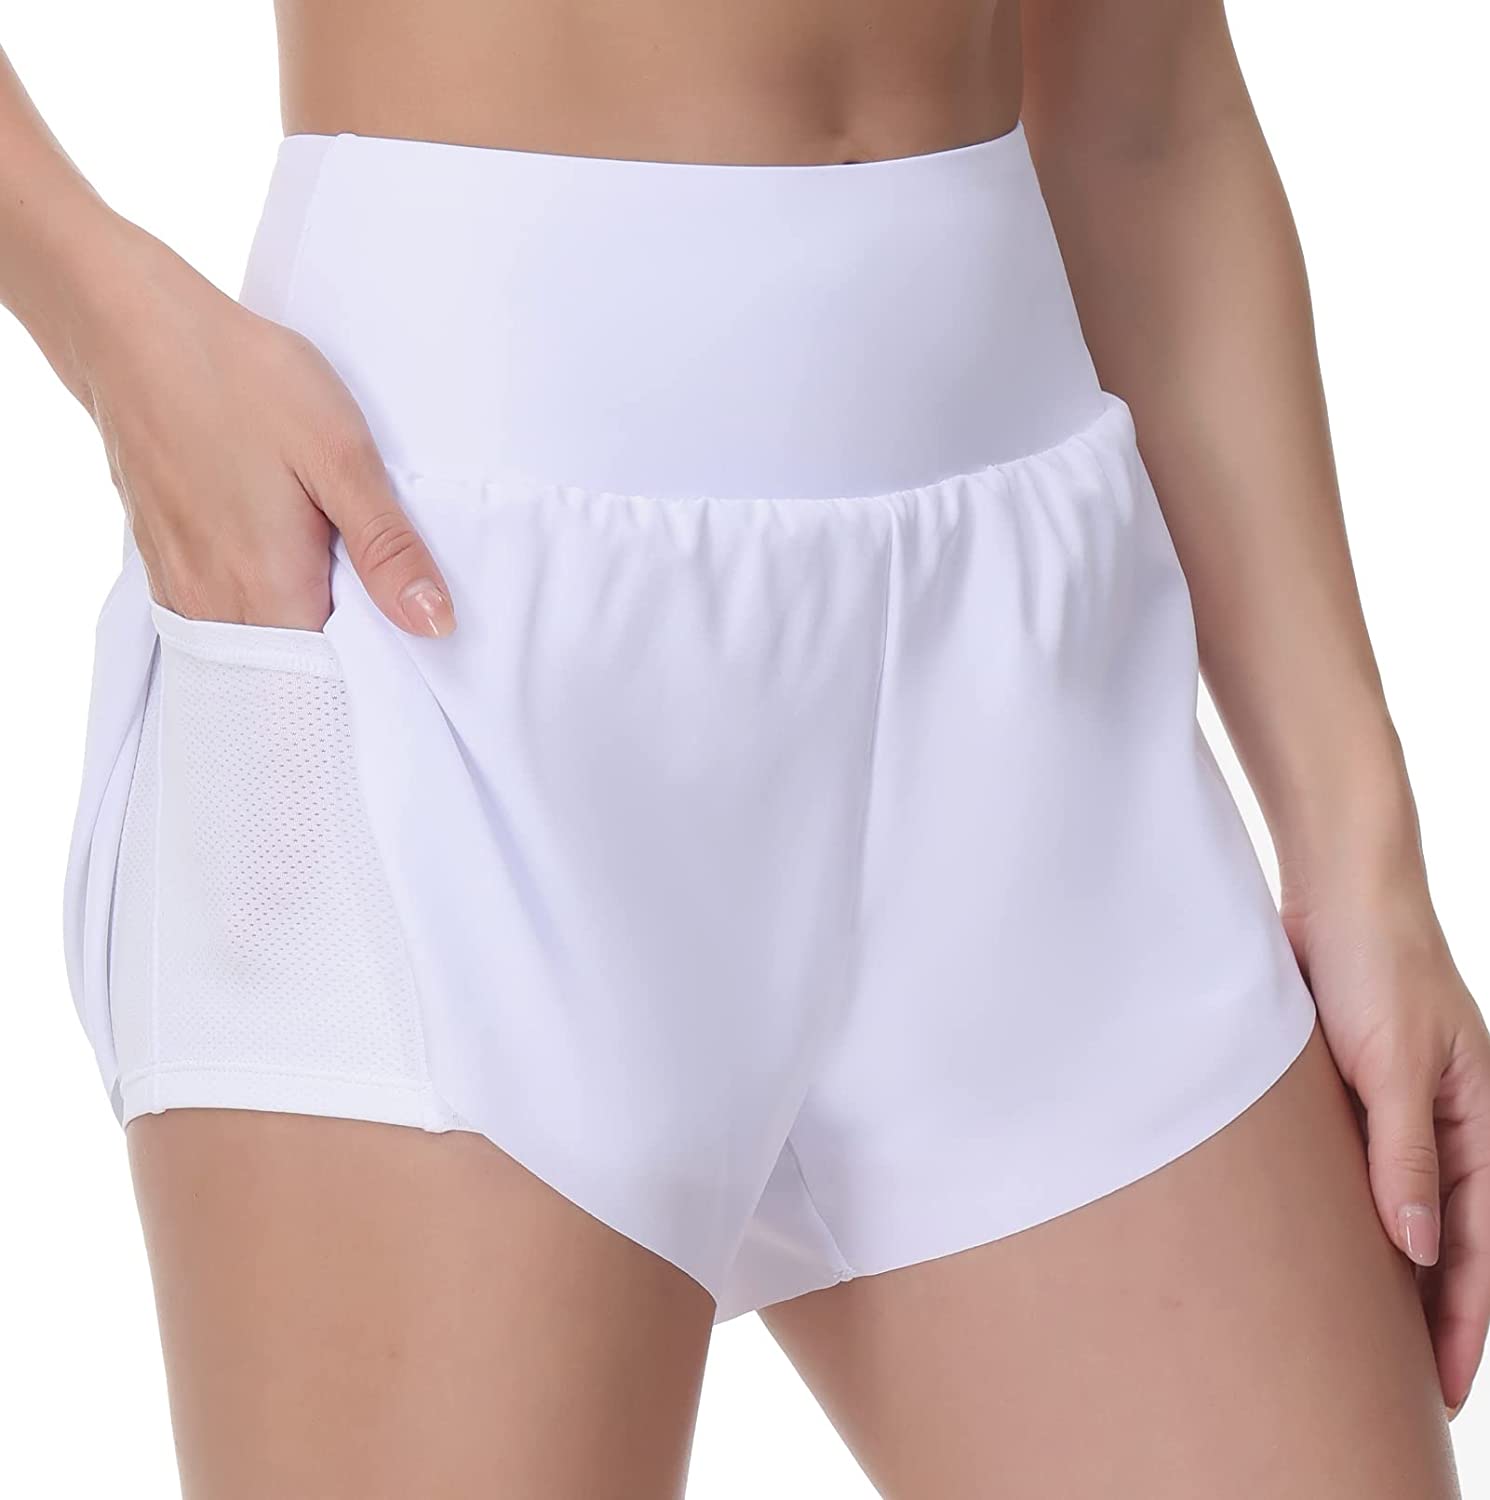 Buy THE GYM PEOPLE Womens High Waisted Running Shorts